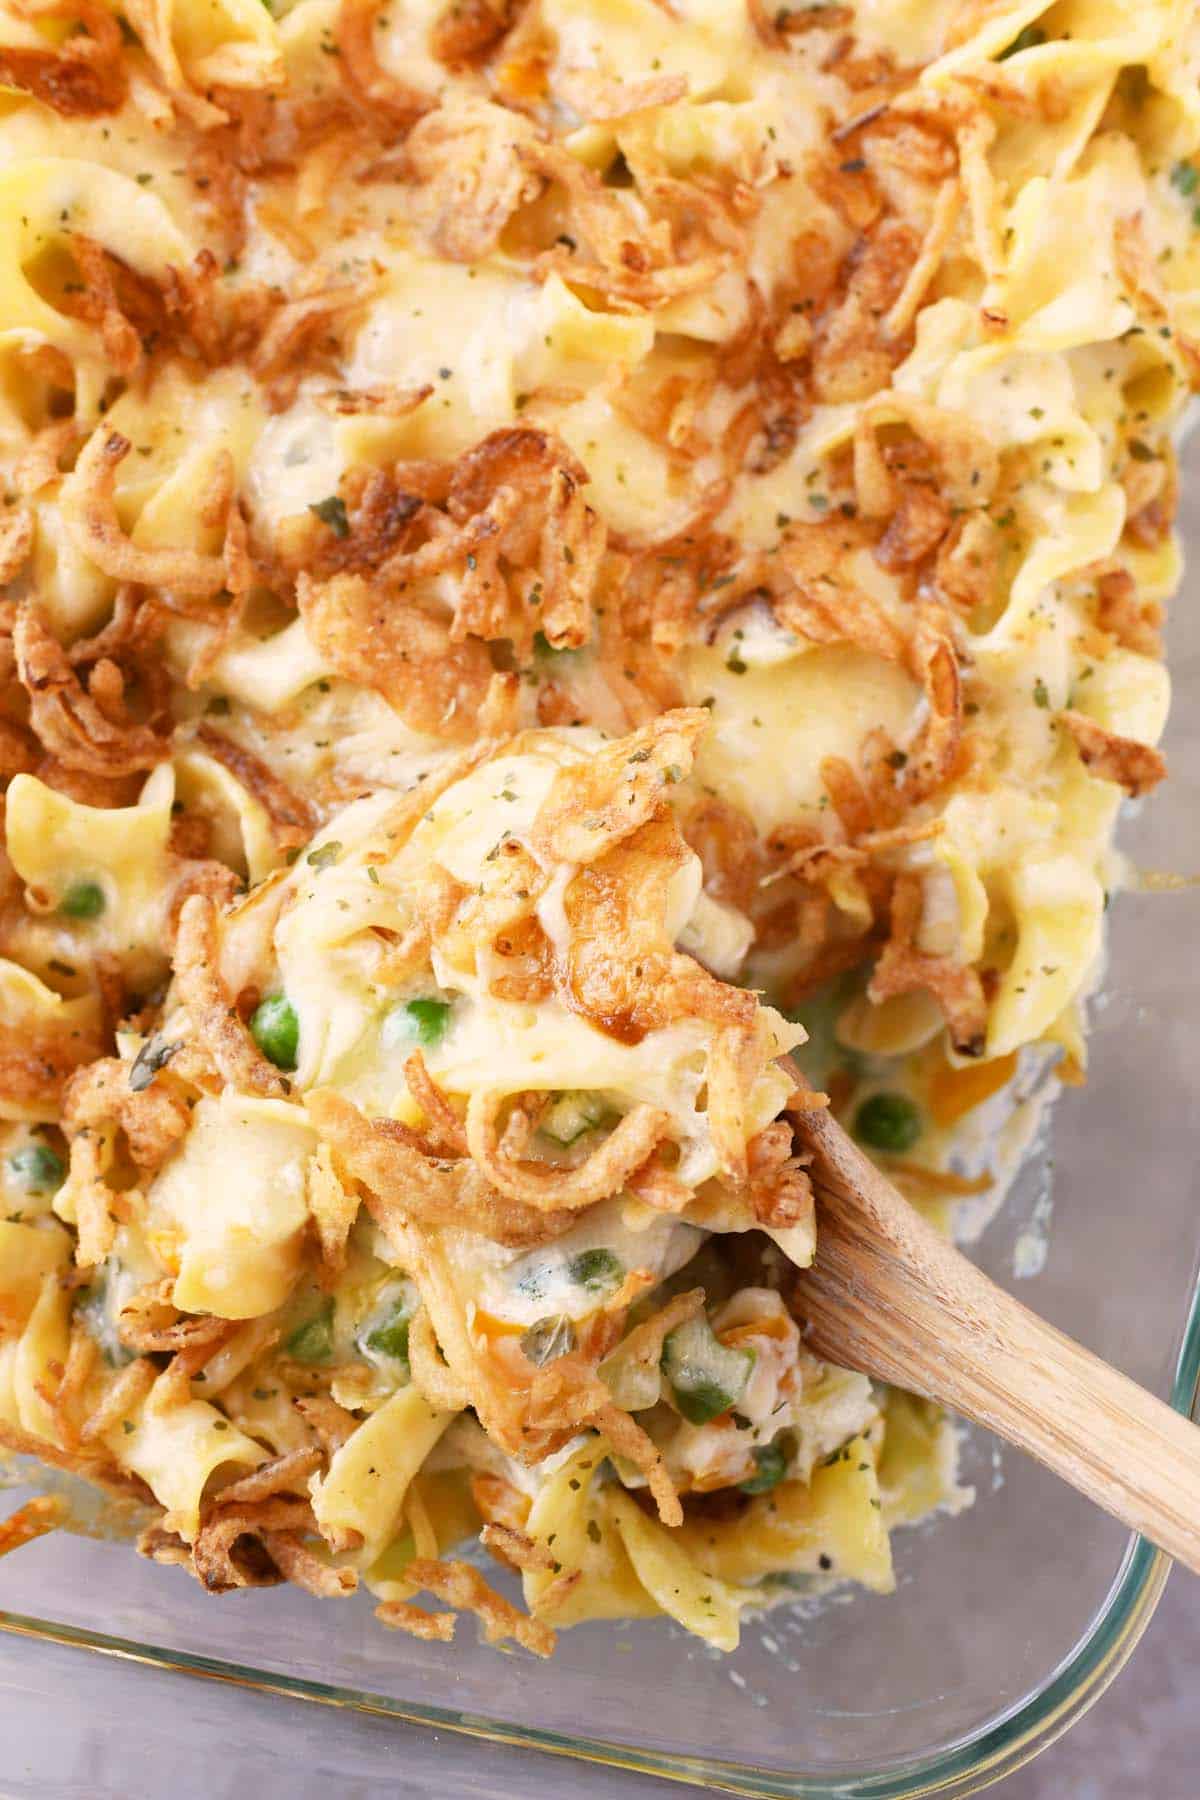 Golden brown tuna noodle casserole on a wooden spoon.